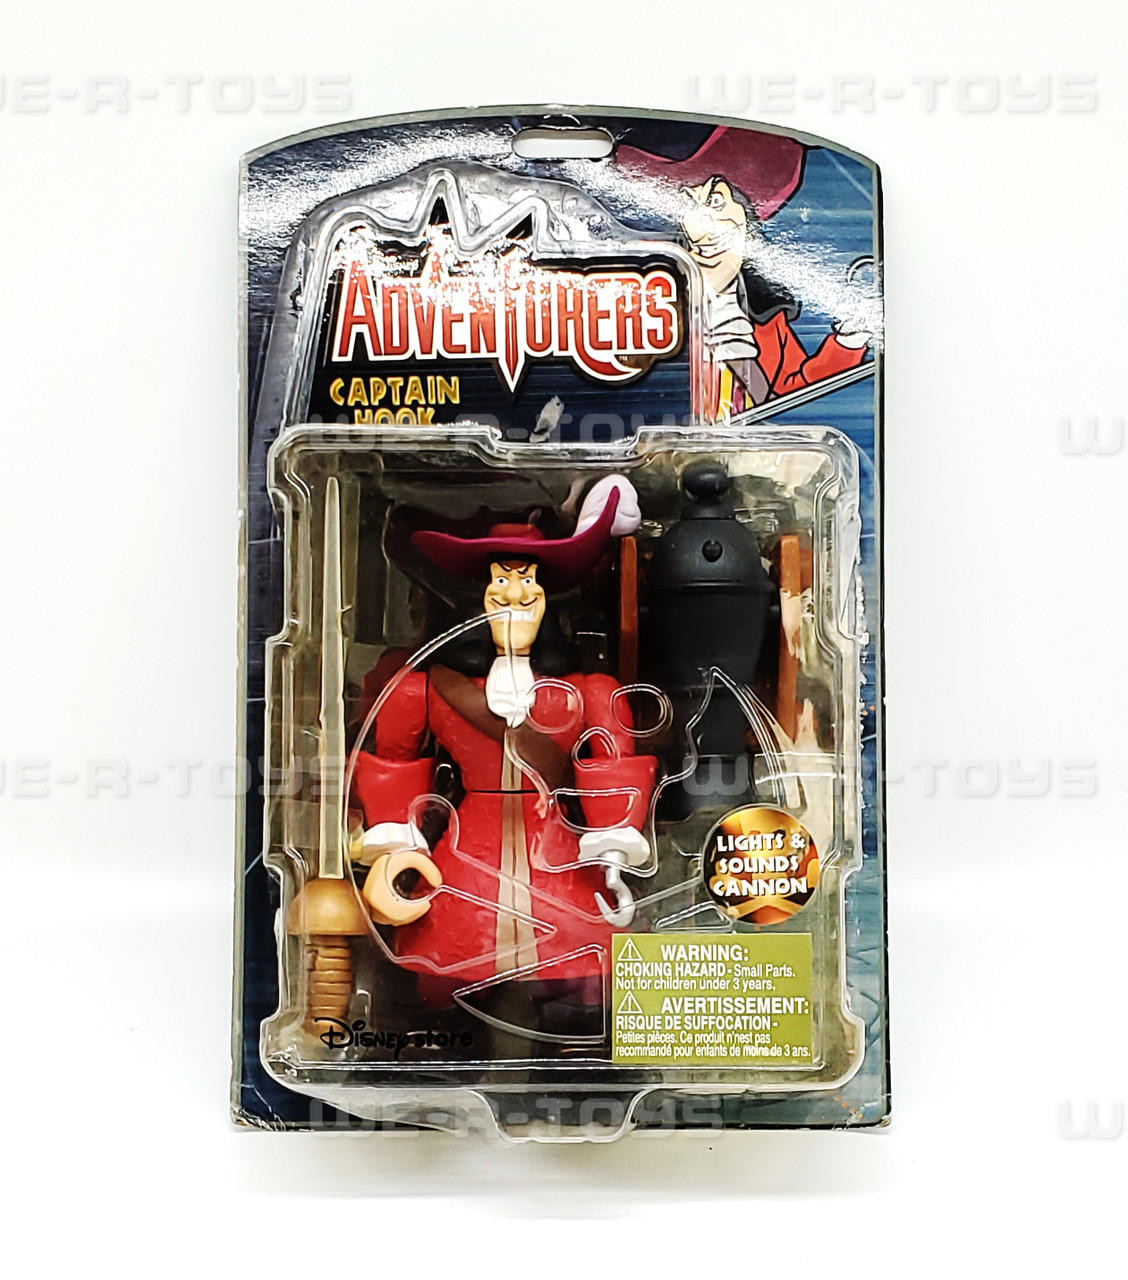 Captain Hook Action Figures, Statues, Collectibles, and More!